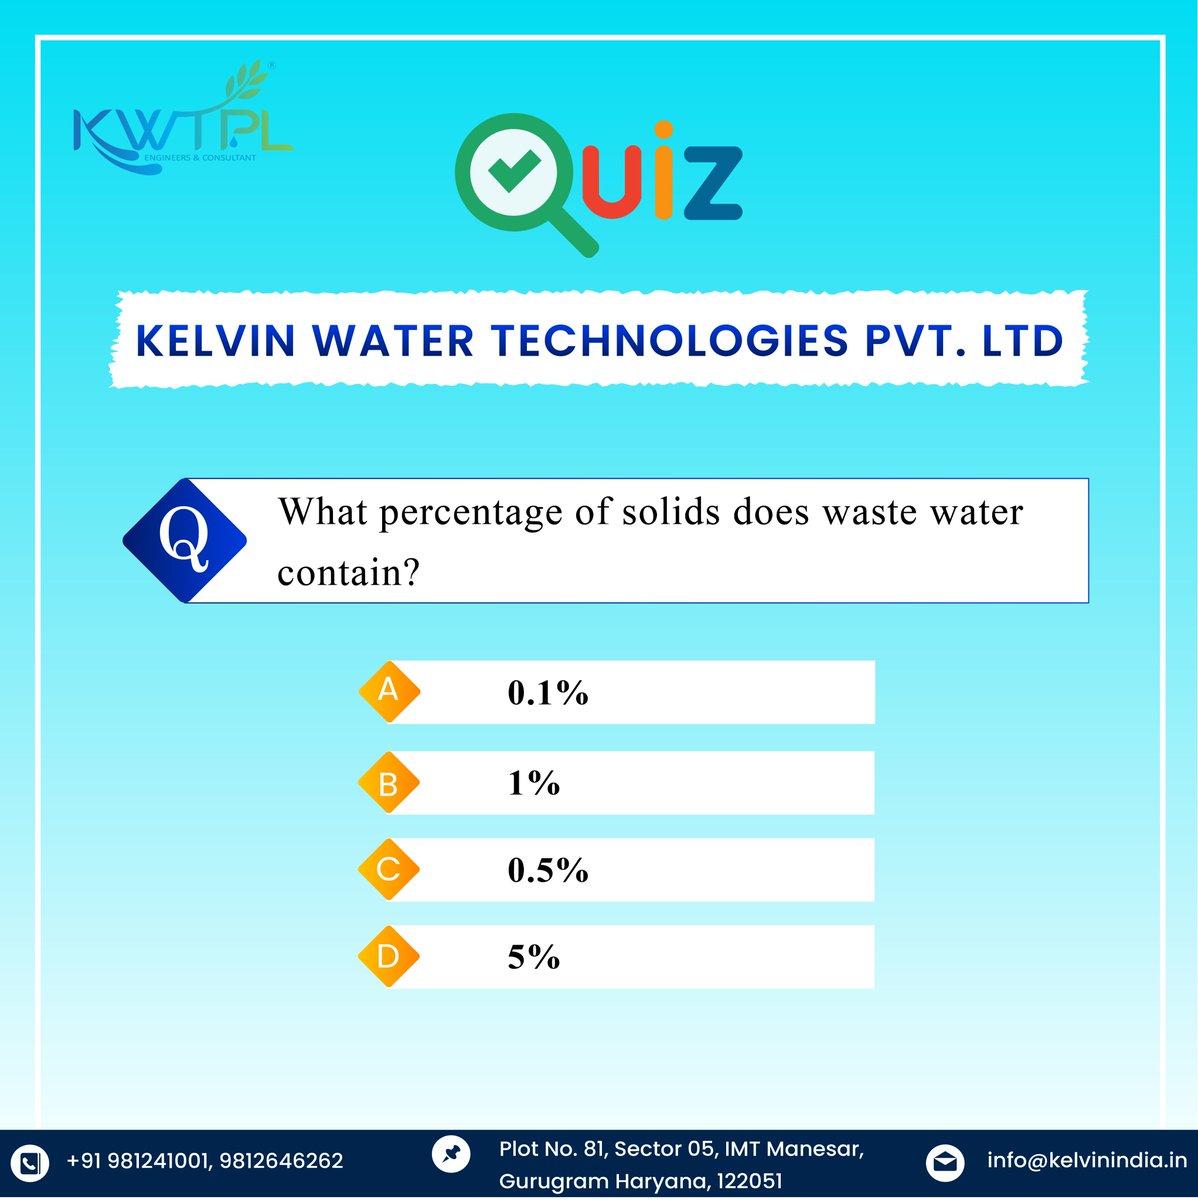 👉 Question Of The Day
Q) What percentage of solids does wastewater contain?
a)  0.1%
b)  1%
c)  0.5%
d)  5%

For More Details kelvinindia.in
info@kelvinindia.in  ☎ 9812241001
.
.
#owcmachine #owc #compost #organicwasteconverter #wastemanagement #organicwaste